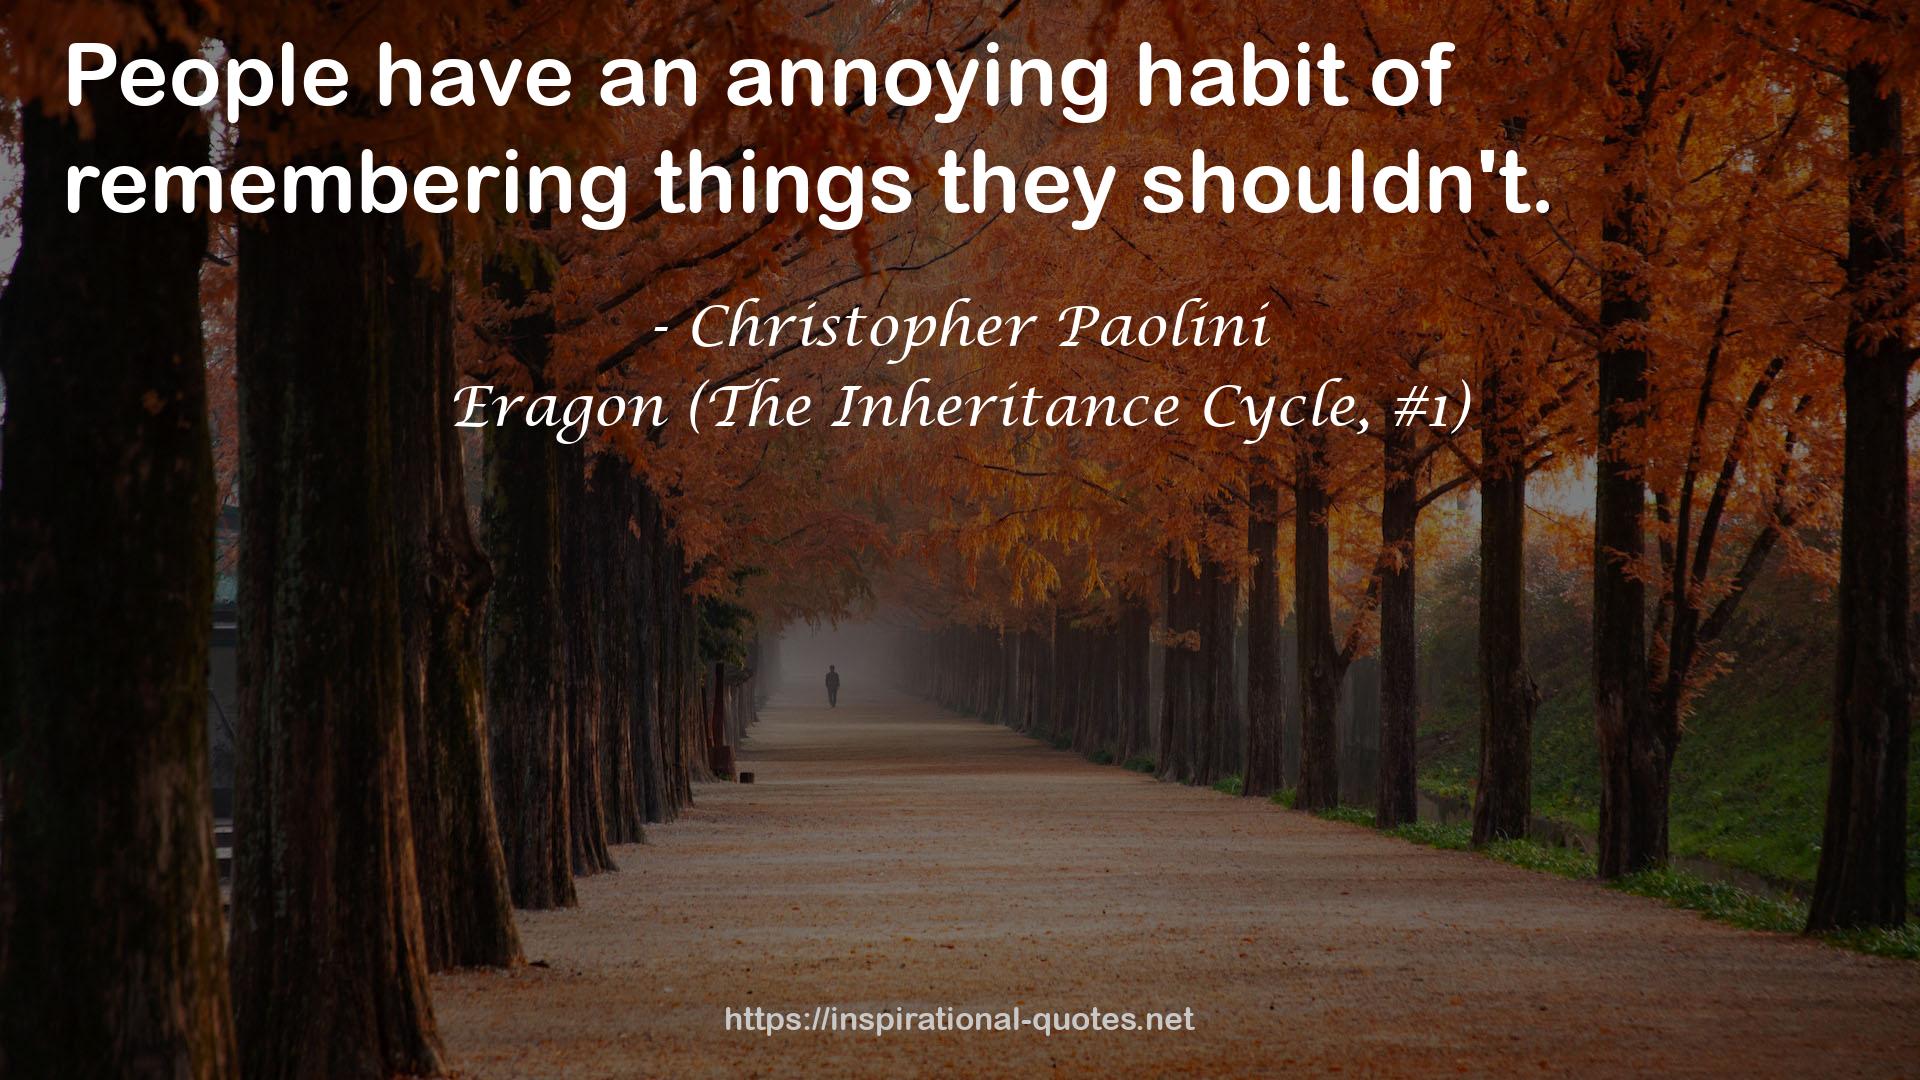 an annoying habit  QUOTES